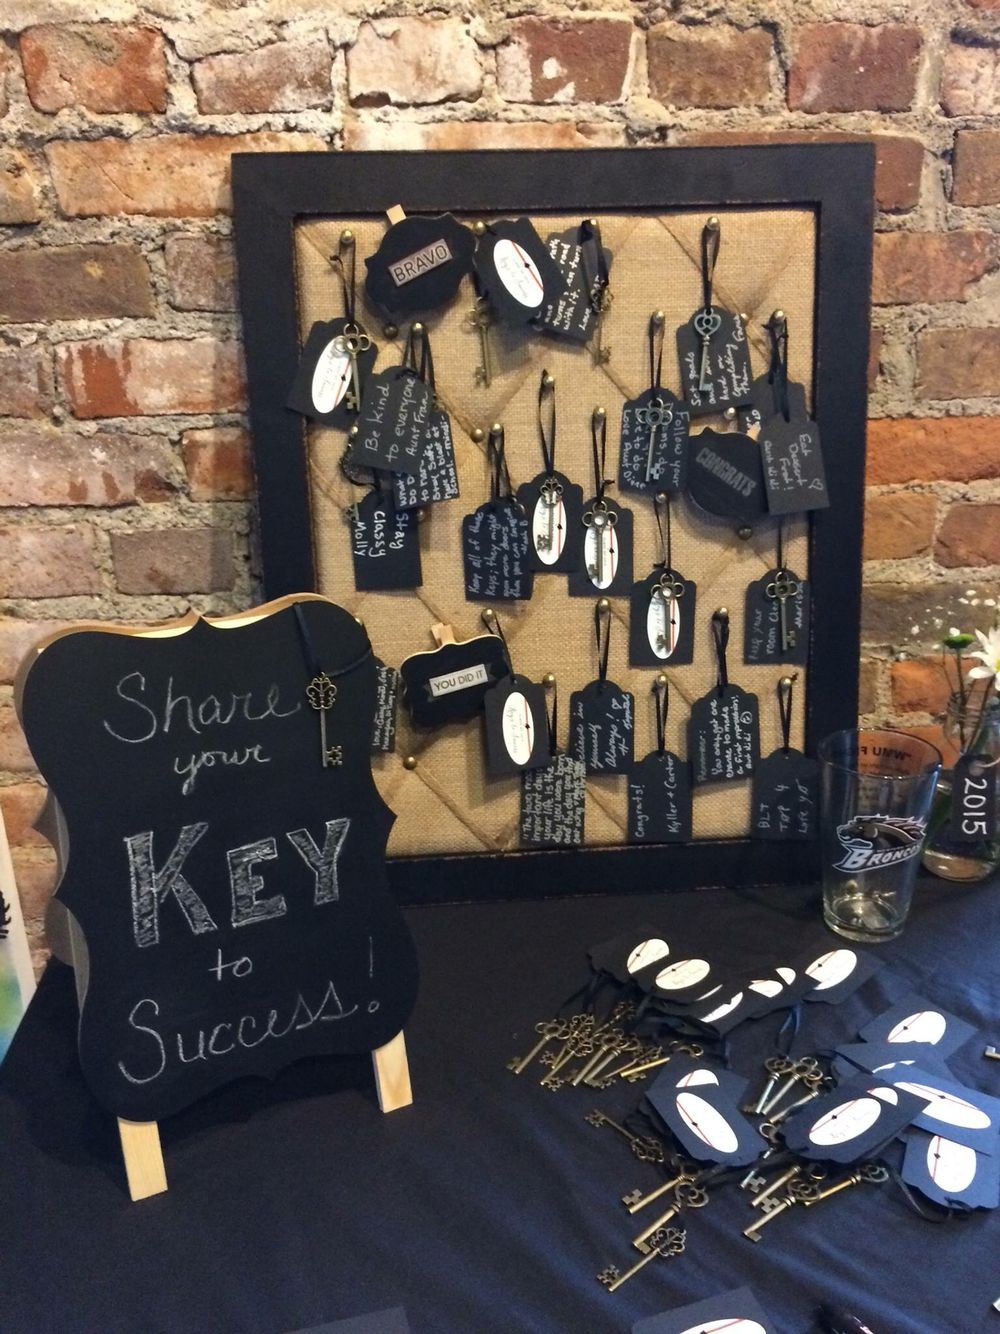 Graduation Party Decoration Ideas For Guys
 Grad party "Keys to Success" table